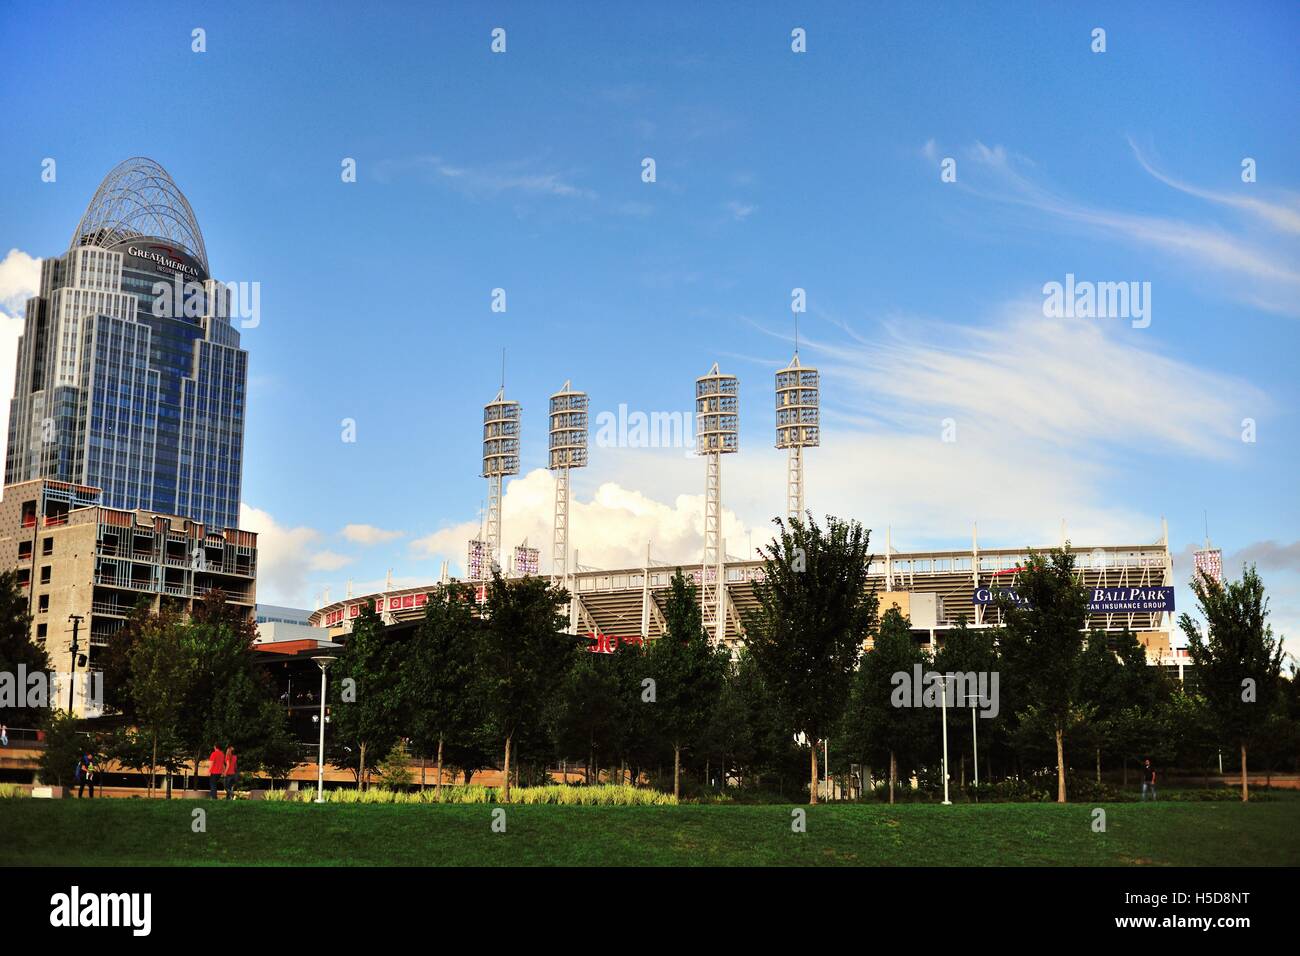 Great American Ball Park Cincinnati Ohio Home Of The Reds Stock Photo -  Download Image Now - iStock